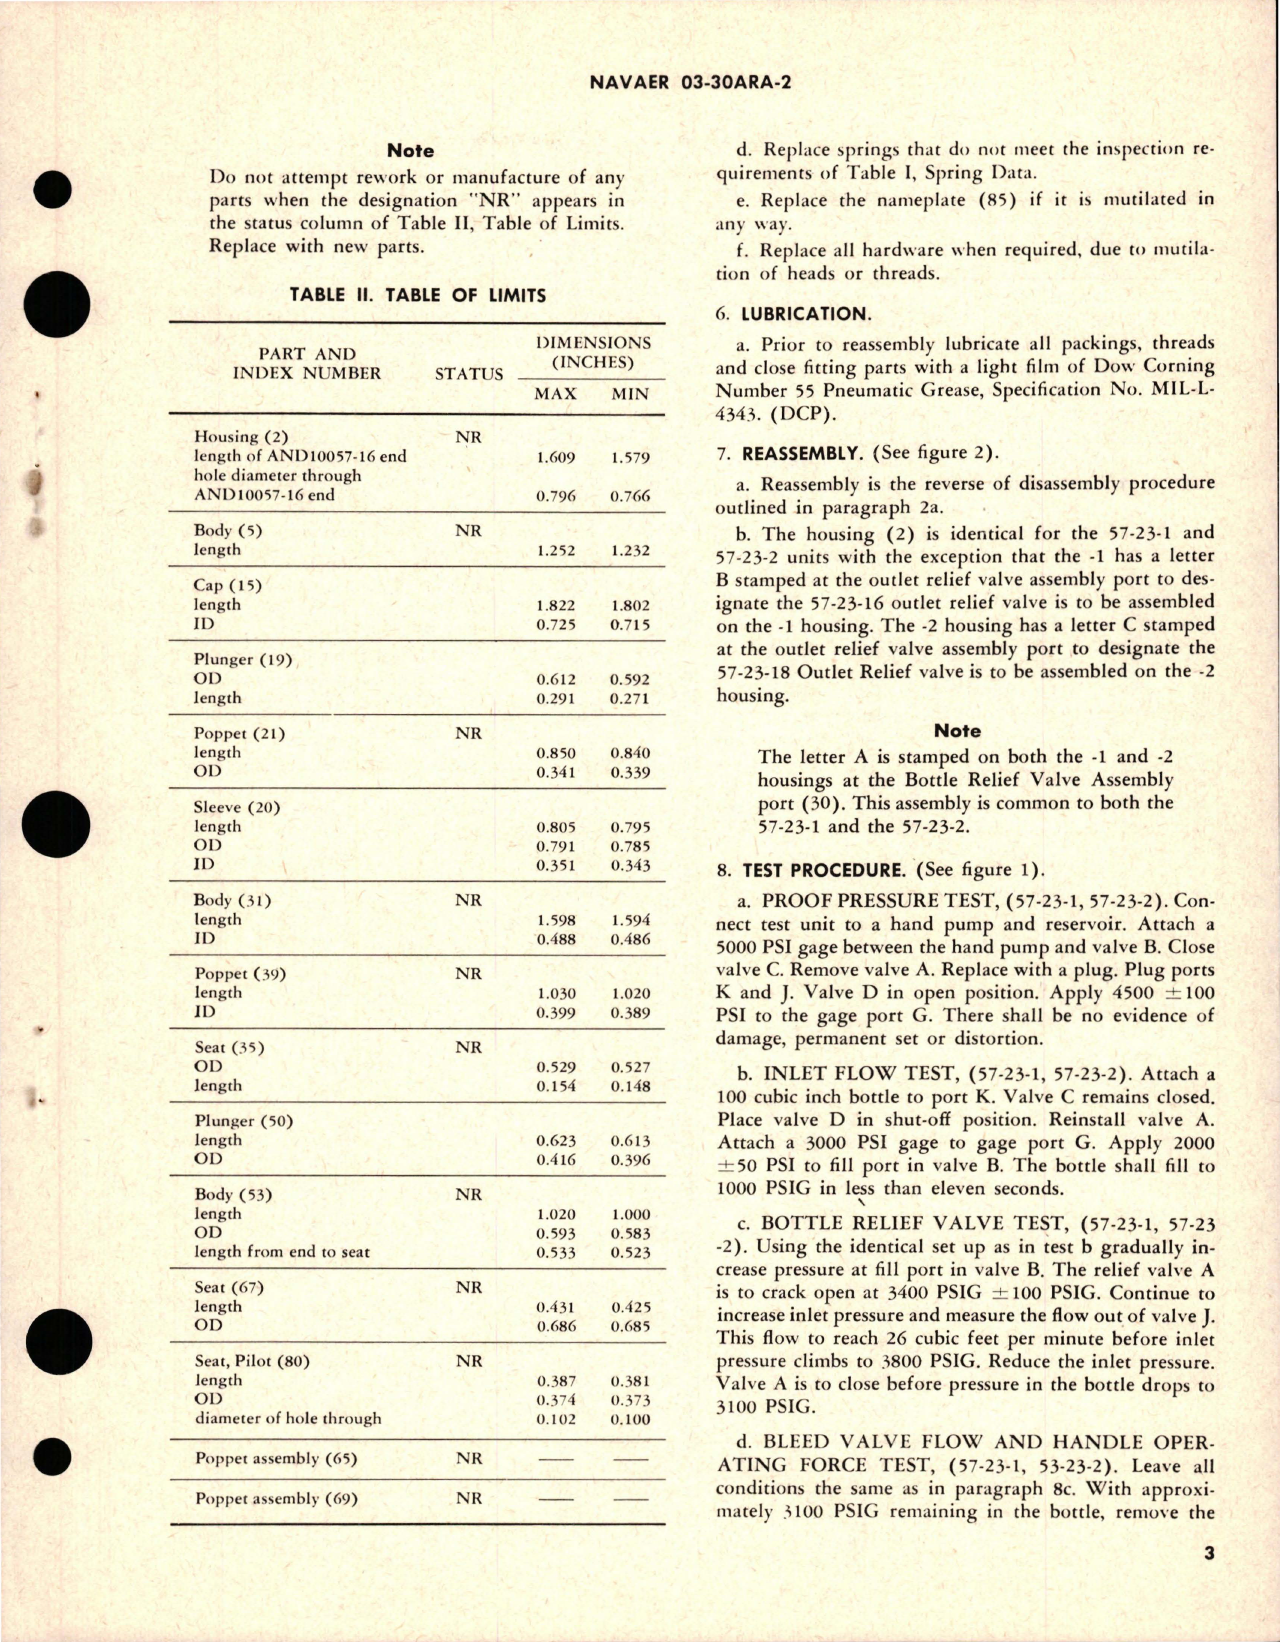 Sample page 5 from AirCorps Library document: Overhaul Instructions with Parts Breakdown for Pneumatic Regulating Air Bottle and Shut-Off Valve - Parts 57-23-1 and 57-23-2 